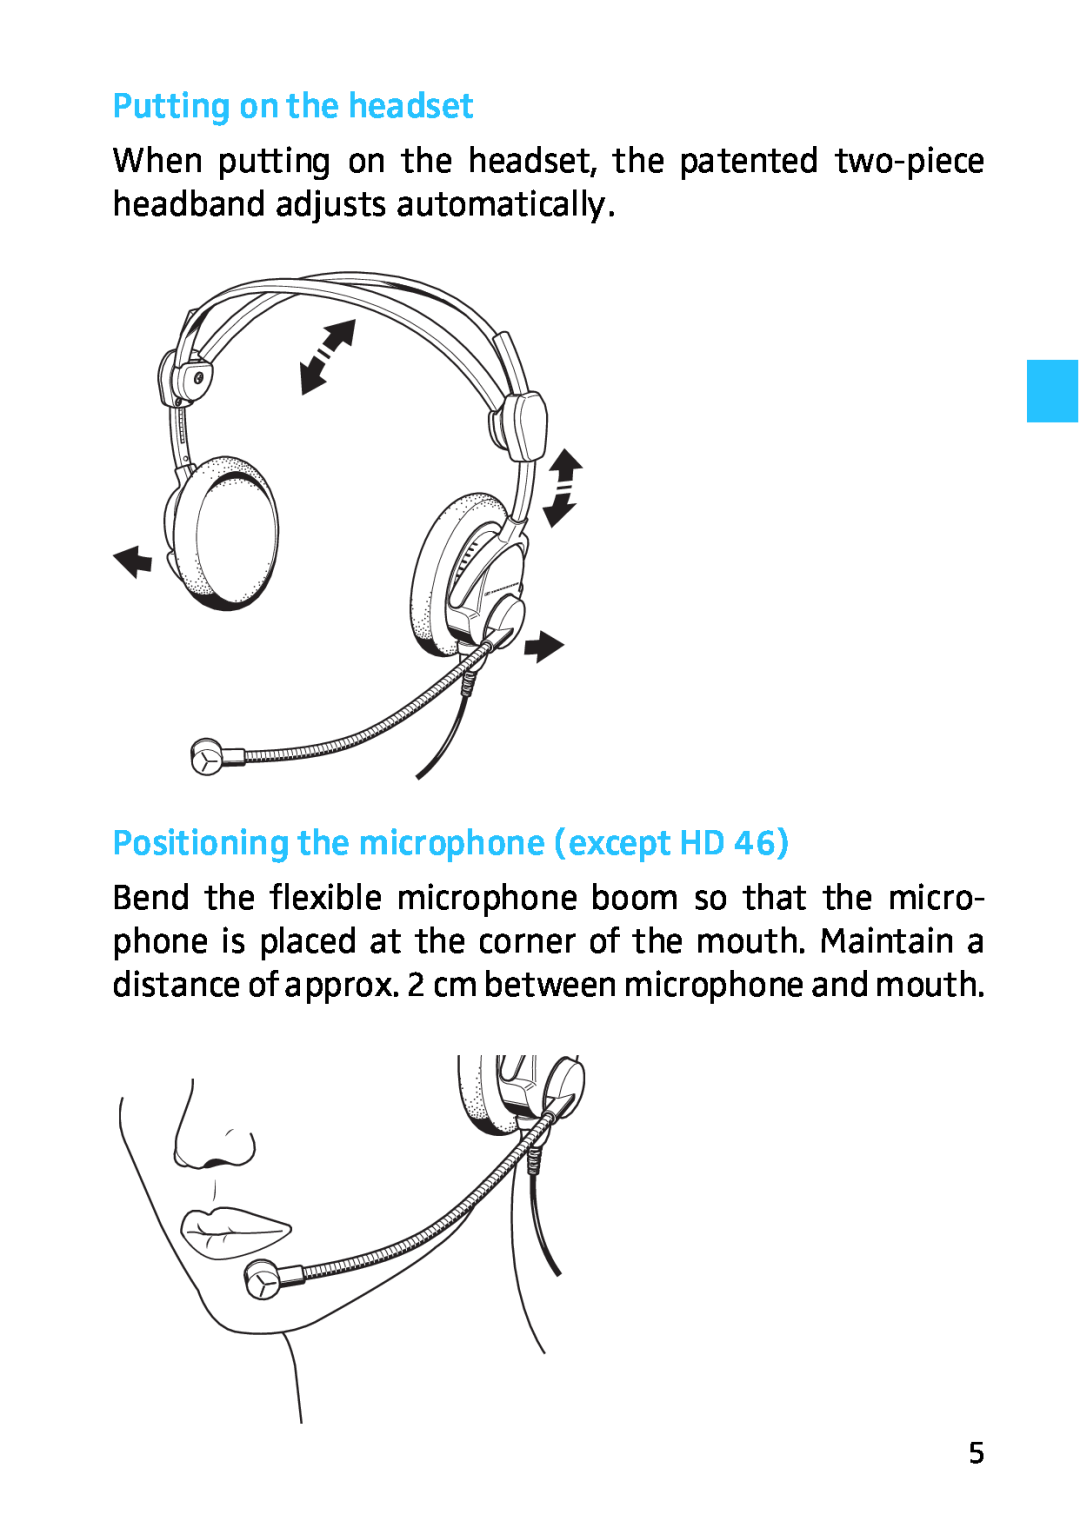 Sennheiser HD HME 46 manual Putting on the headset, Positioning the microphone except HD 